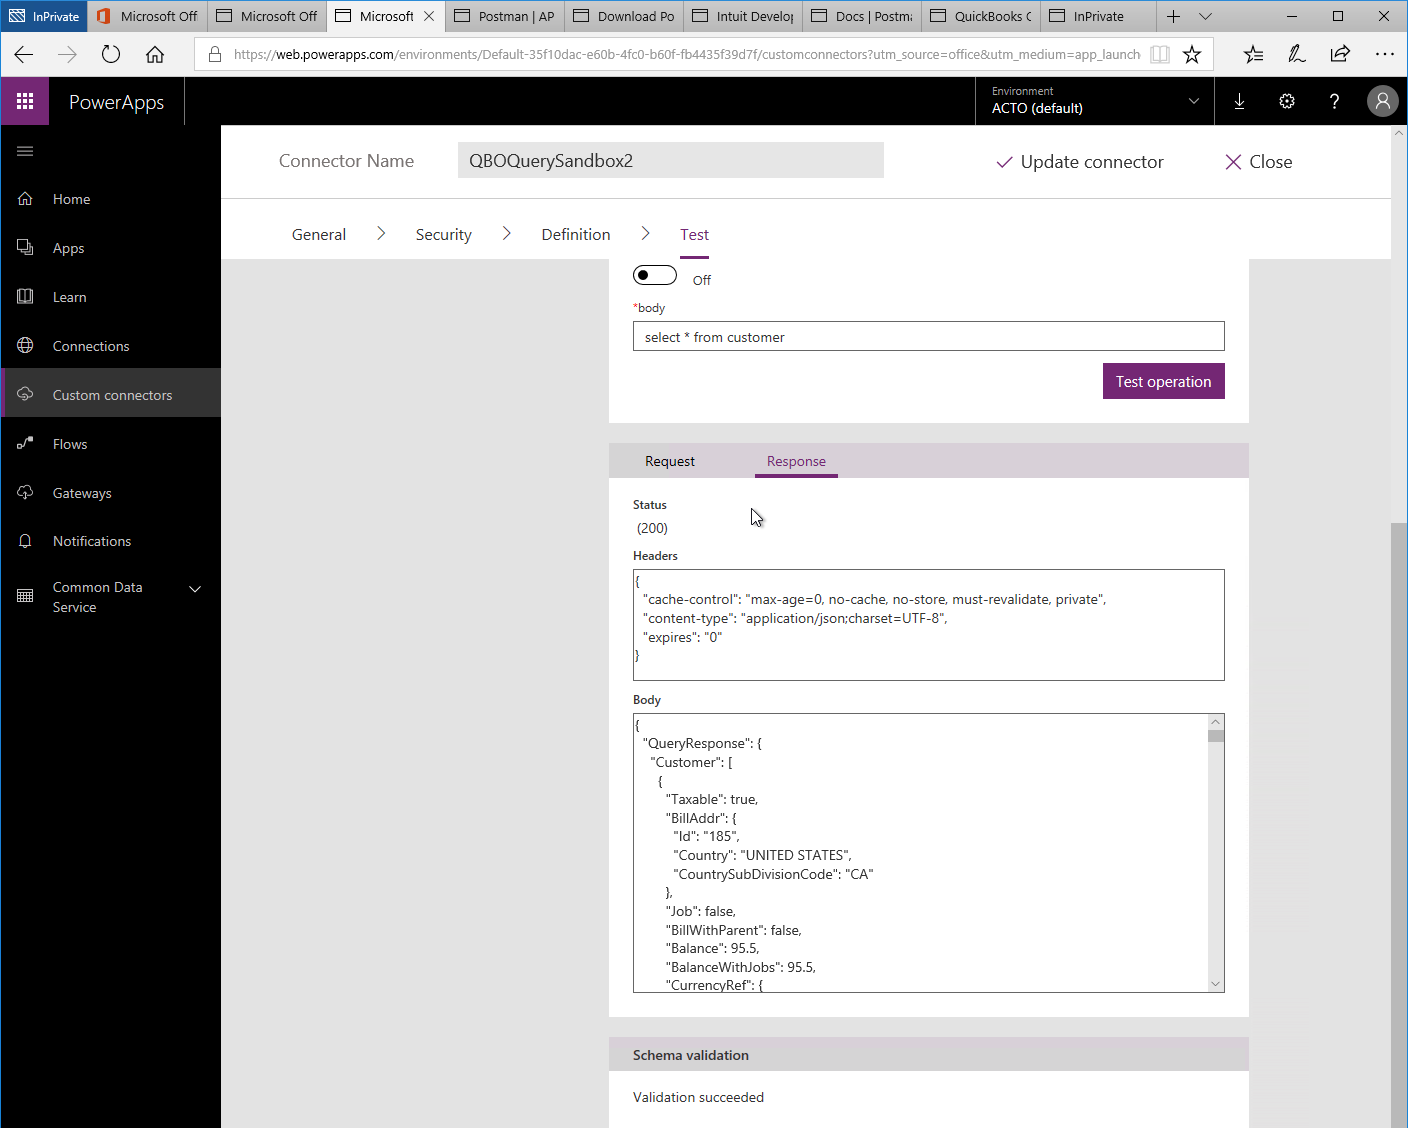 Machine generated alternative text:
Microsoft 
Postman I AP 
Microsoft Off 
x 
Q 
O Microsoft Off 
PowerApps 
Home 
Apps 
Lea rn 
Connections 
Custom connectors 
Flows 
Gateways 
Notifications 
Common Data 
Service 
Download PO Intuit Develo' Docs Postm 
QuickBooks ( 
lnPrivate 
'Web.powerapps.com/environments/Default-35f1 Odac-e60b-4fc0-b60f-fb4435f3gd7f/custom rce = m 
Environment 
ACTO (default) 
111 
Connector Name 
QBOQuerySandbox2 
Test 
Off 
select from customer 
V Update connector 
Test operation 
X Close 
General 
> 
Security 
Definition 
Request 
Status 
(200) 
Headers 
"expires": "O" 
Body 
Response 
"cache-control": "max-age=O, no-cache, no-store must-revalidate, private", 
"content-type": 
' QueryResponse": { 
"Customer": 
' Taxable": true, 
' BillAddr": { 
"Id": "185", 
"Country "UNITED STATES", 
"CountrySubDivisionCode": "CA" 
"Job": false, 
' BillWithParent": false, 
' Balance". 95.5, 
' BalanceWithJobs": 95.5, 
' Curren Ref": 
Schema validation 
Validation succeeded 